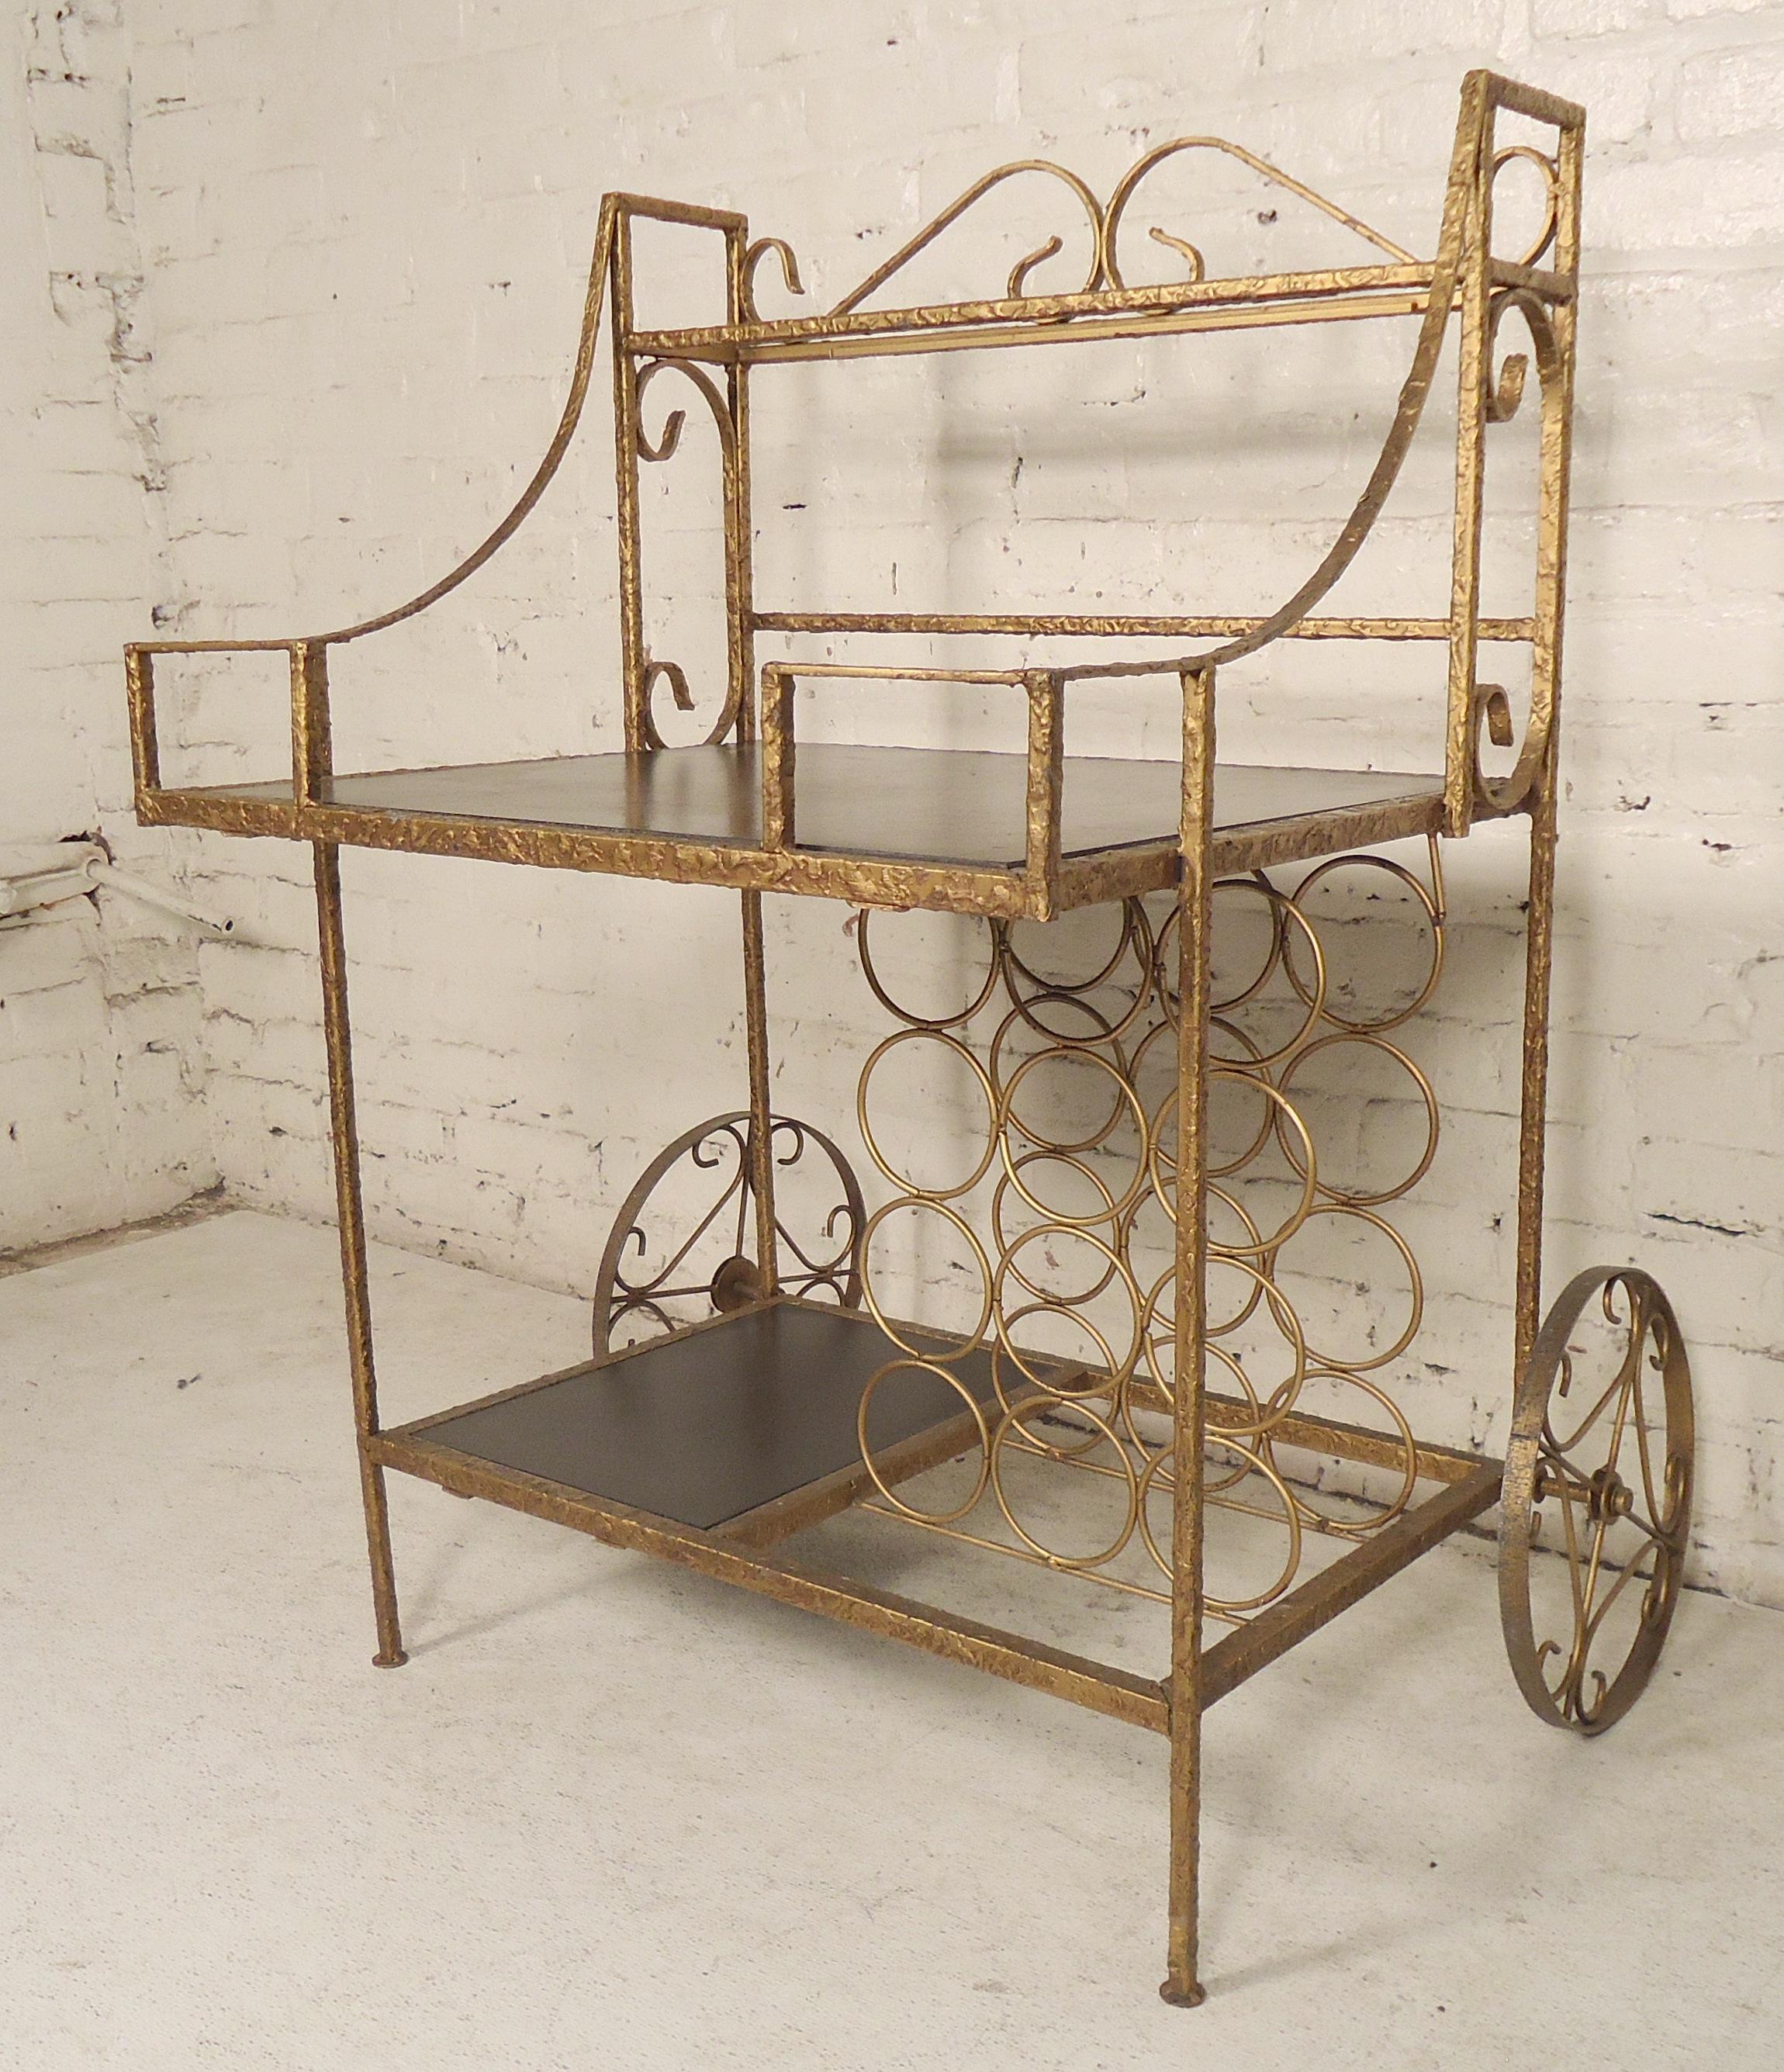 Vintage brass bar cart with black shelving and wine rack.

(Please confirm item location - NY or NJ - with dealer).
 